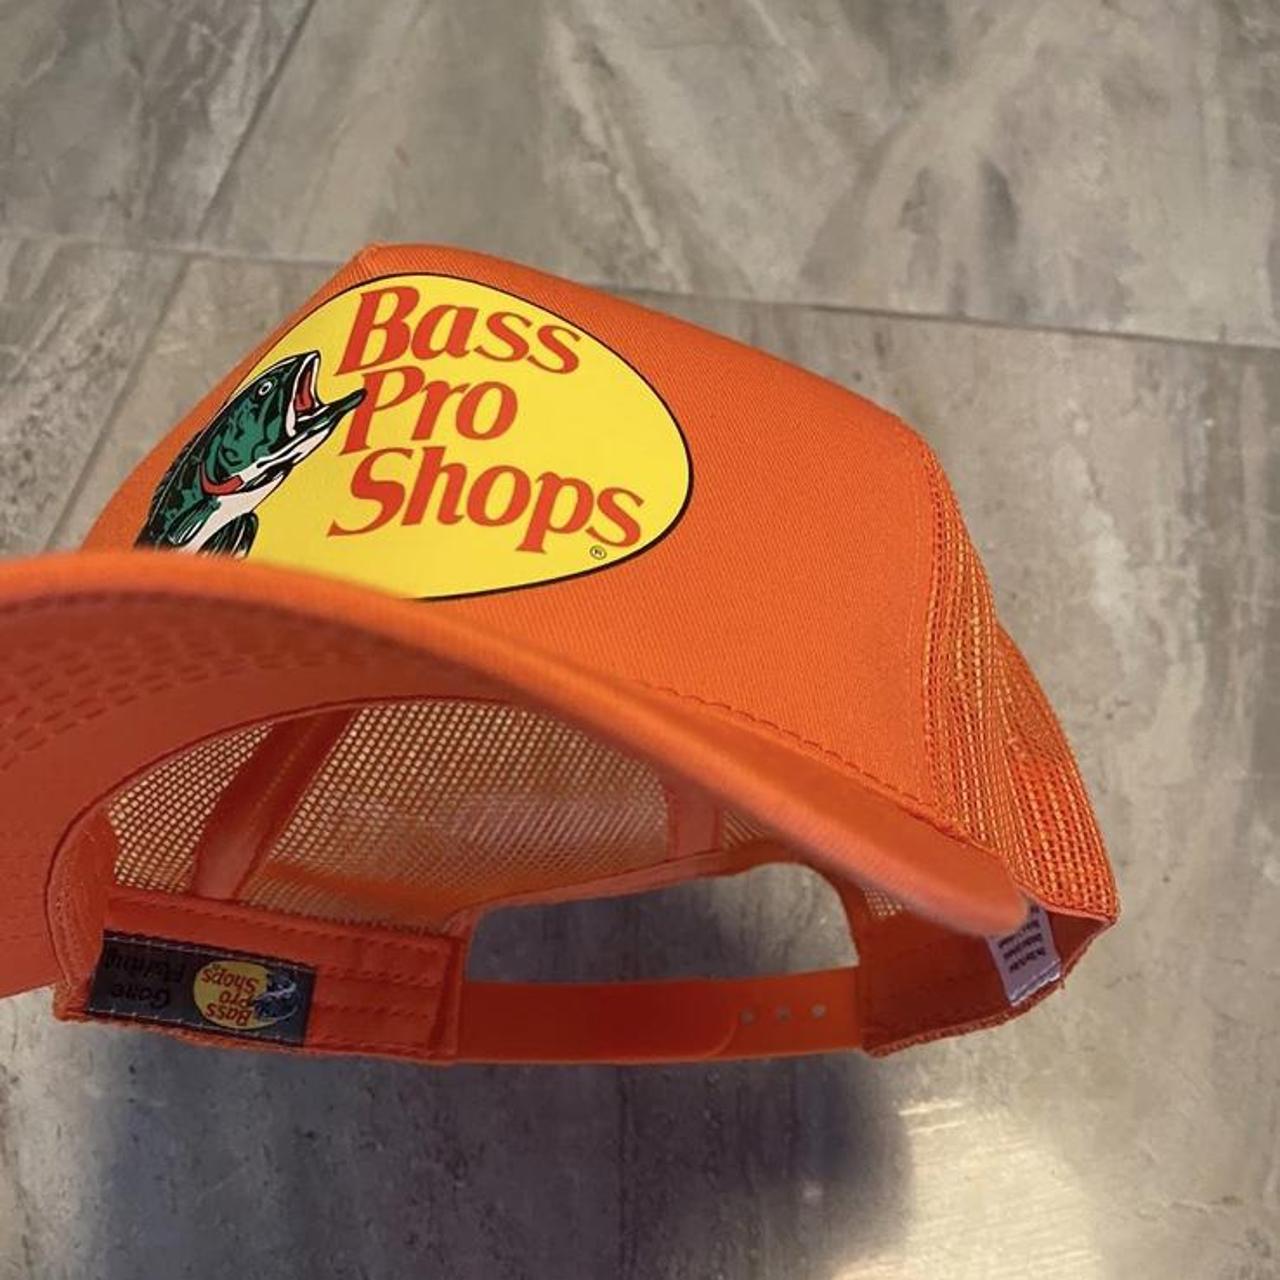 New Bass Pro Shops Mesh Cap - Orange New with tags - Depop